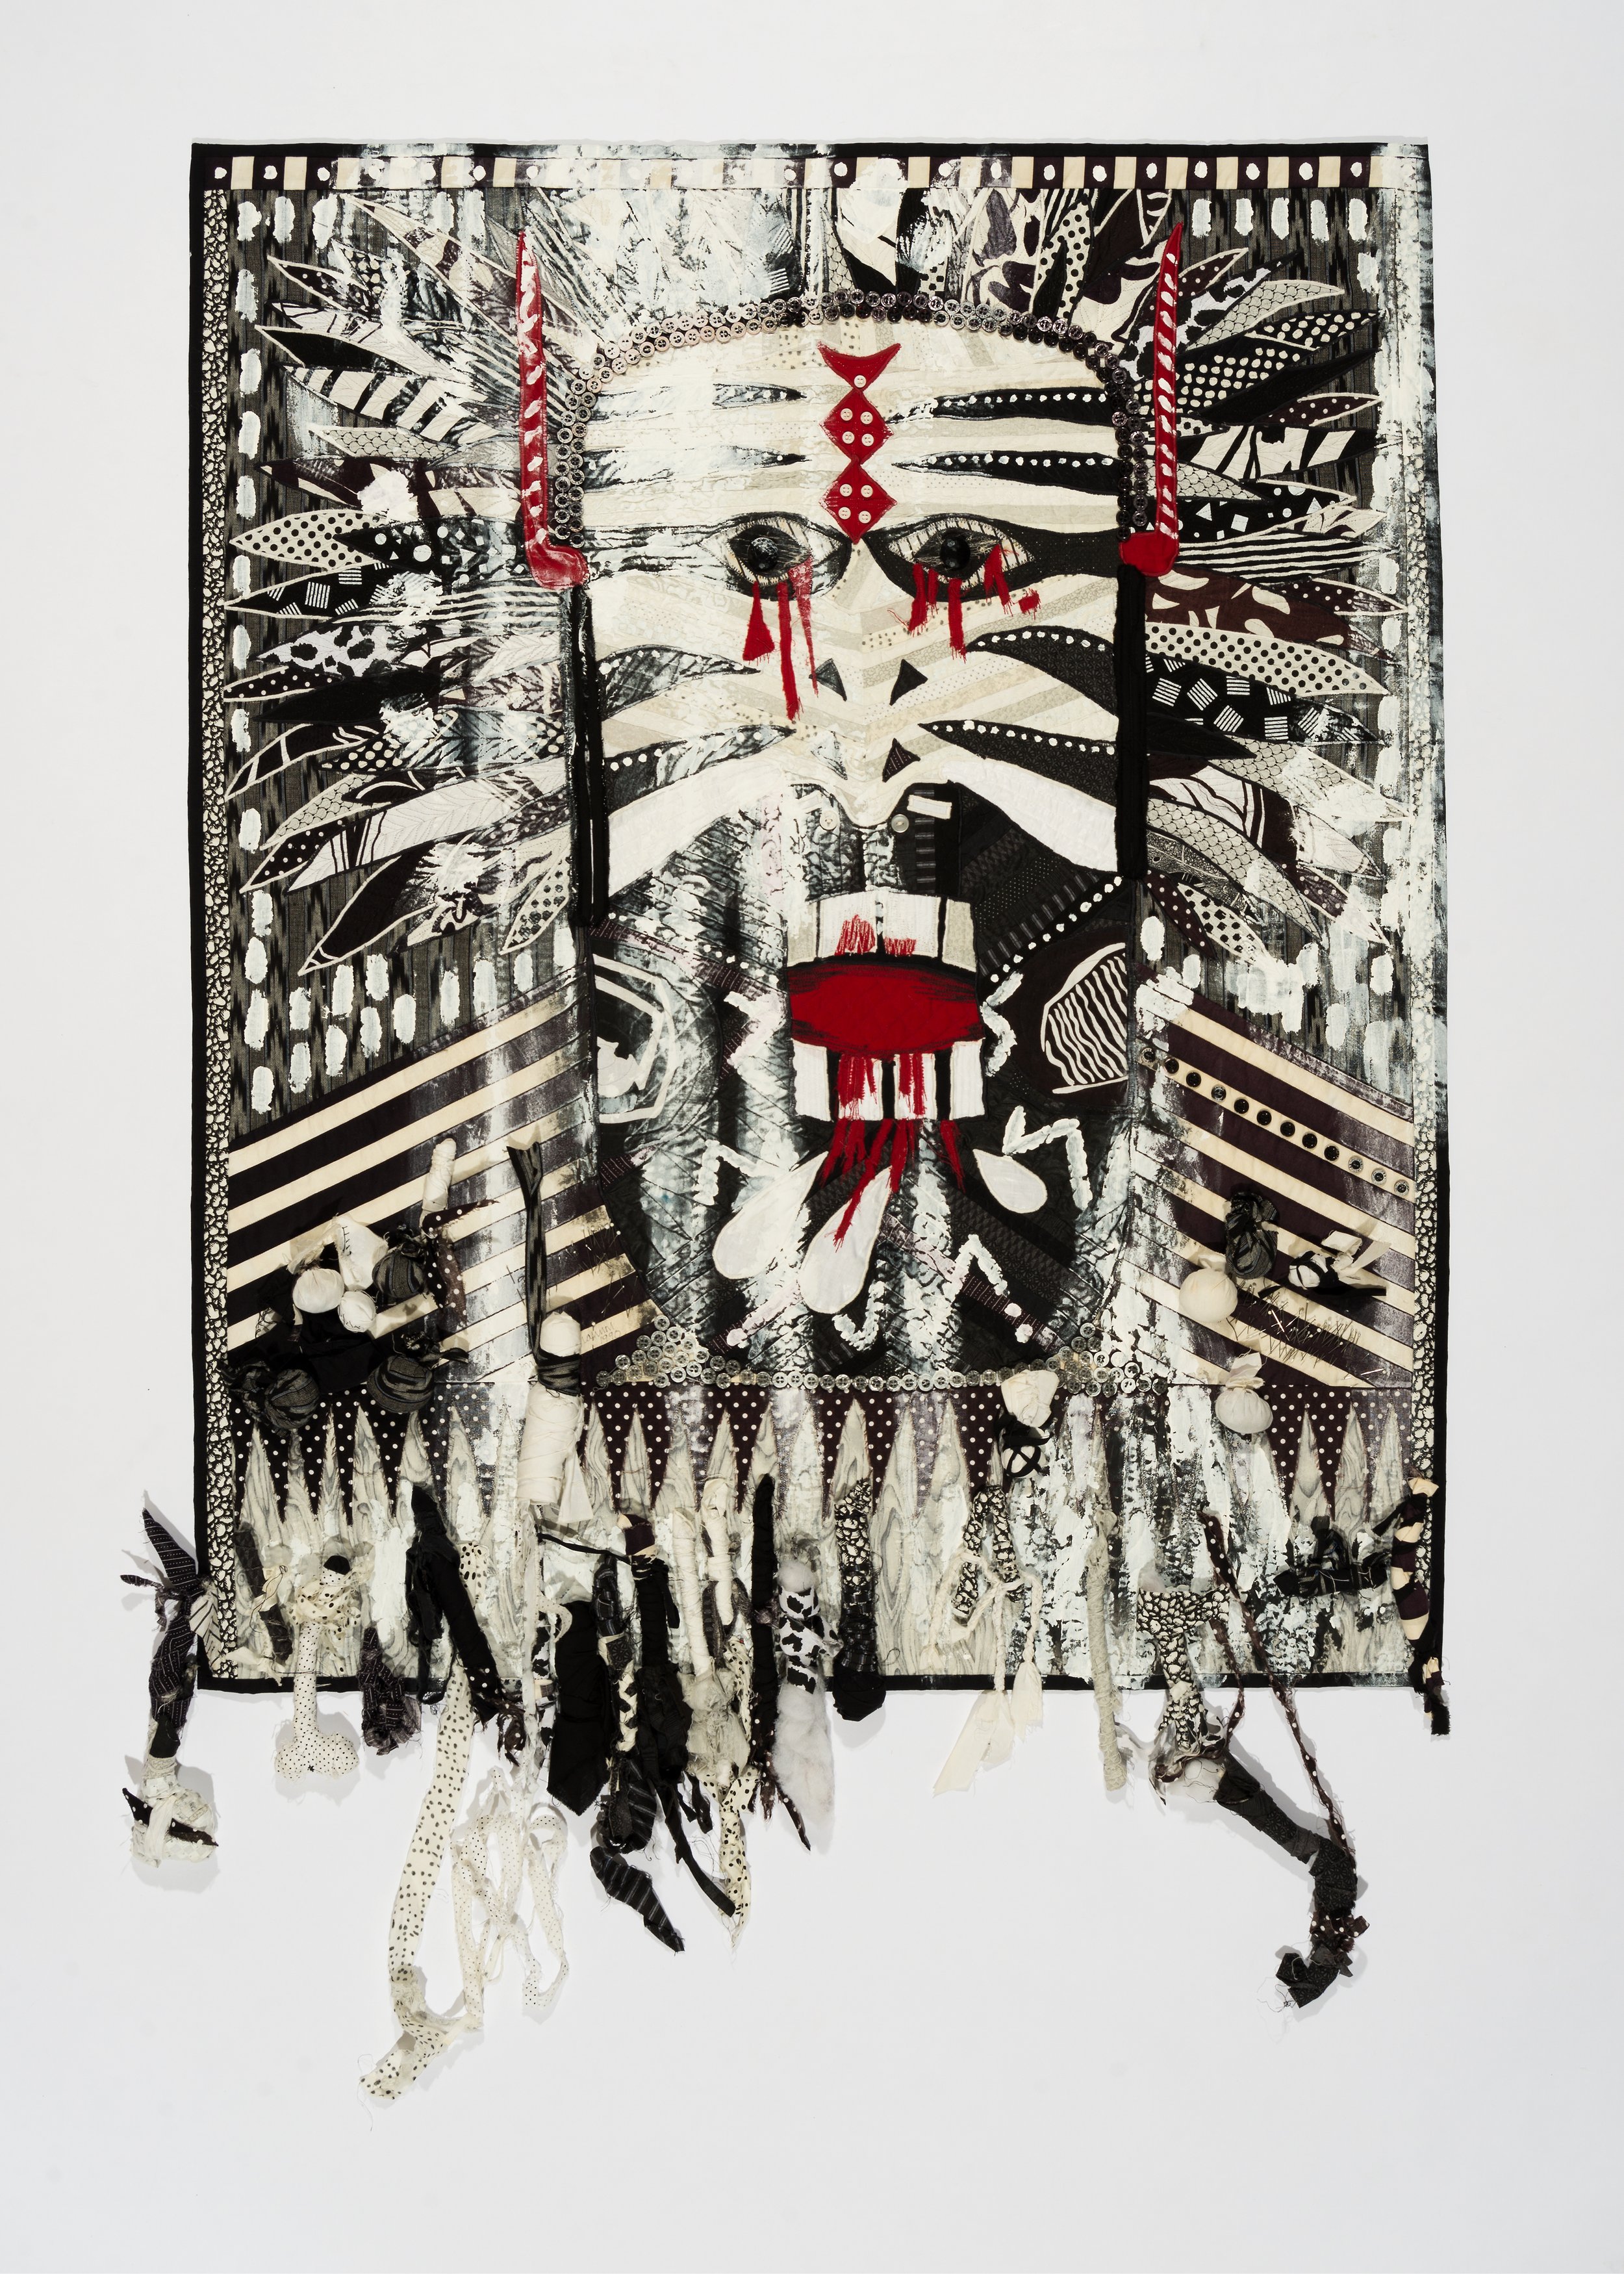 Jonathan Shannon, Totem: The Fear of Black and White, 1990. 